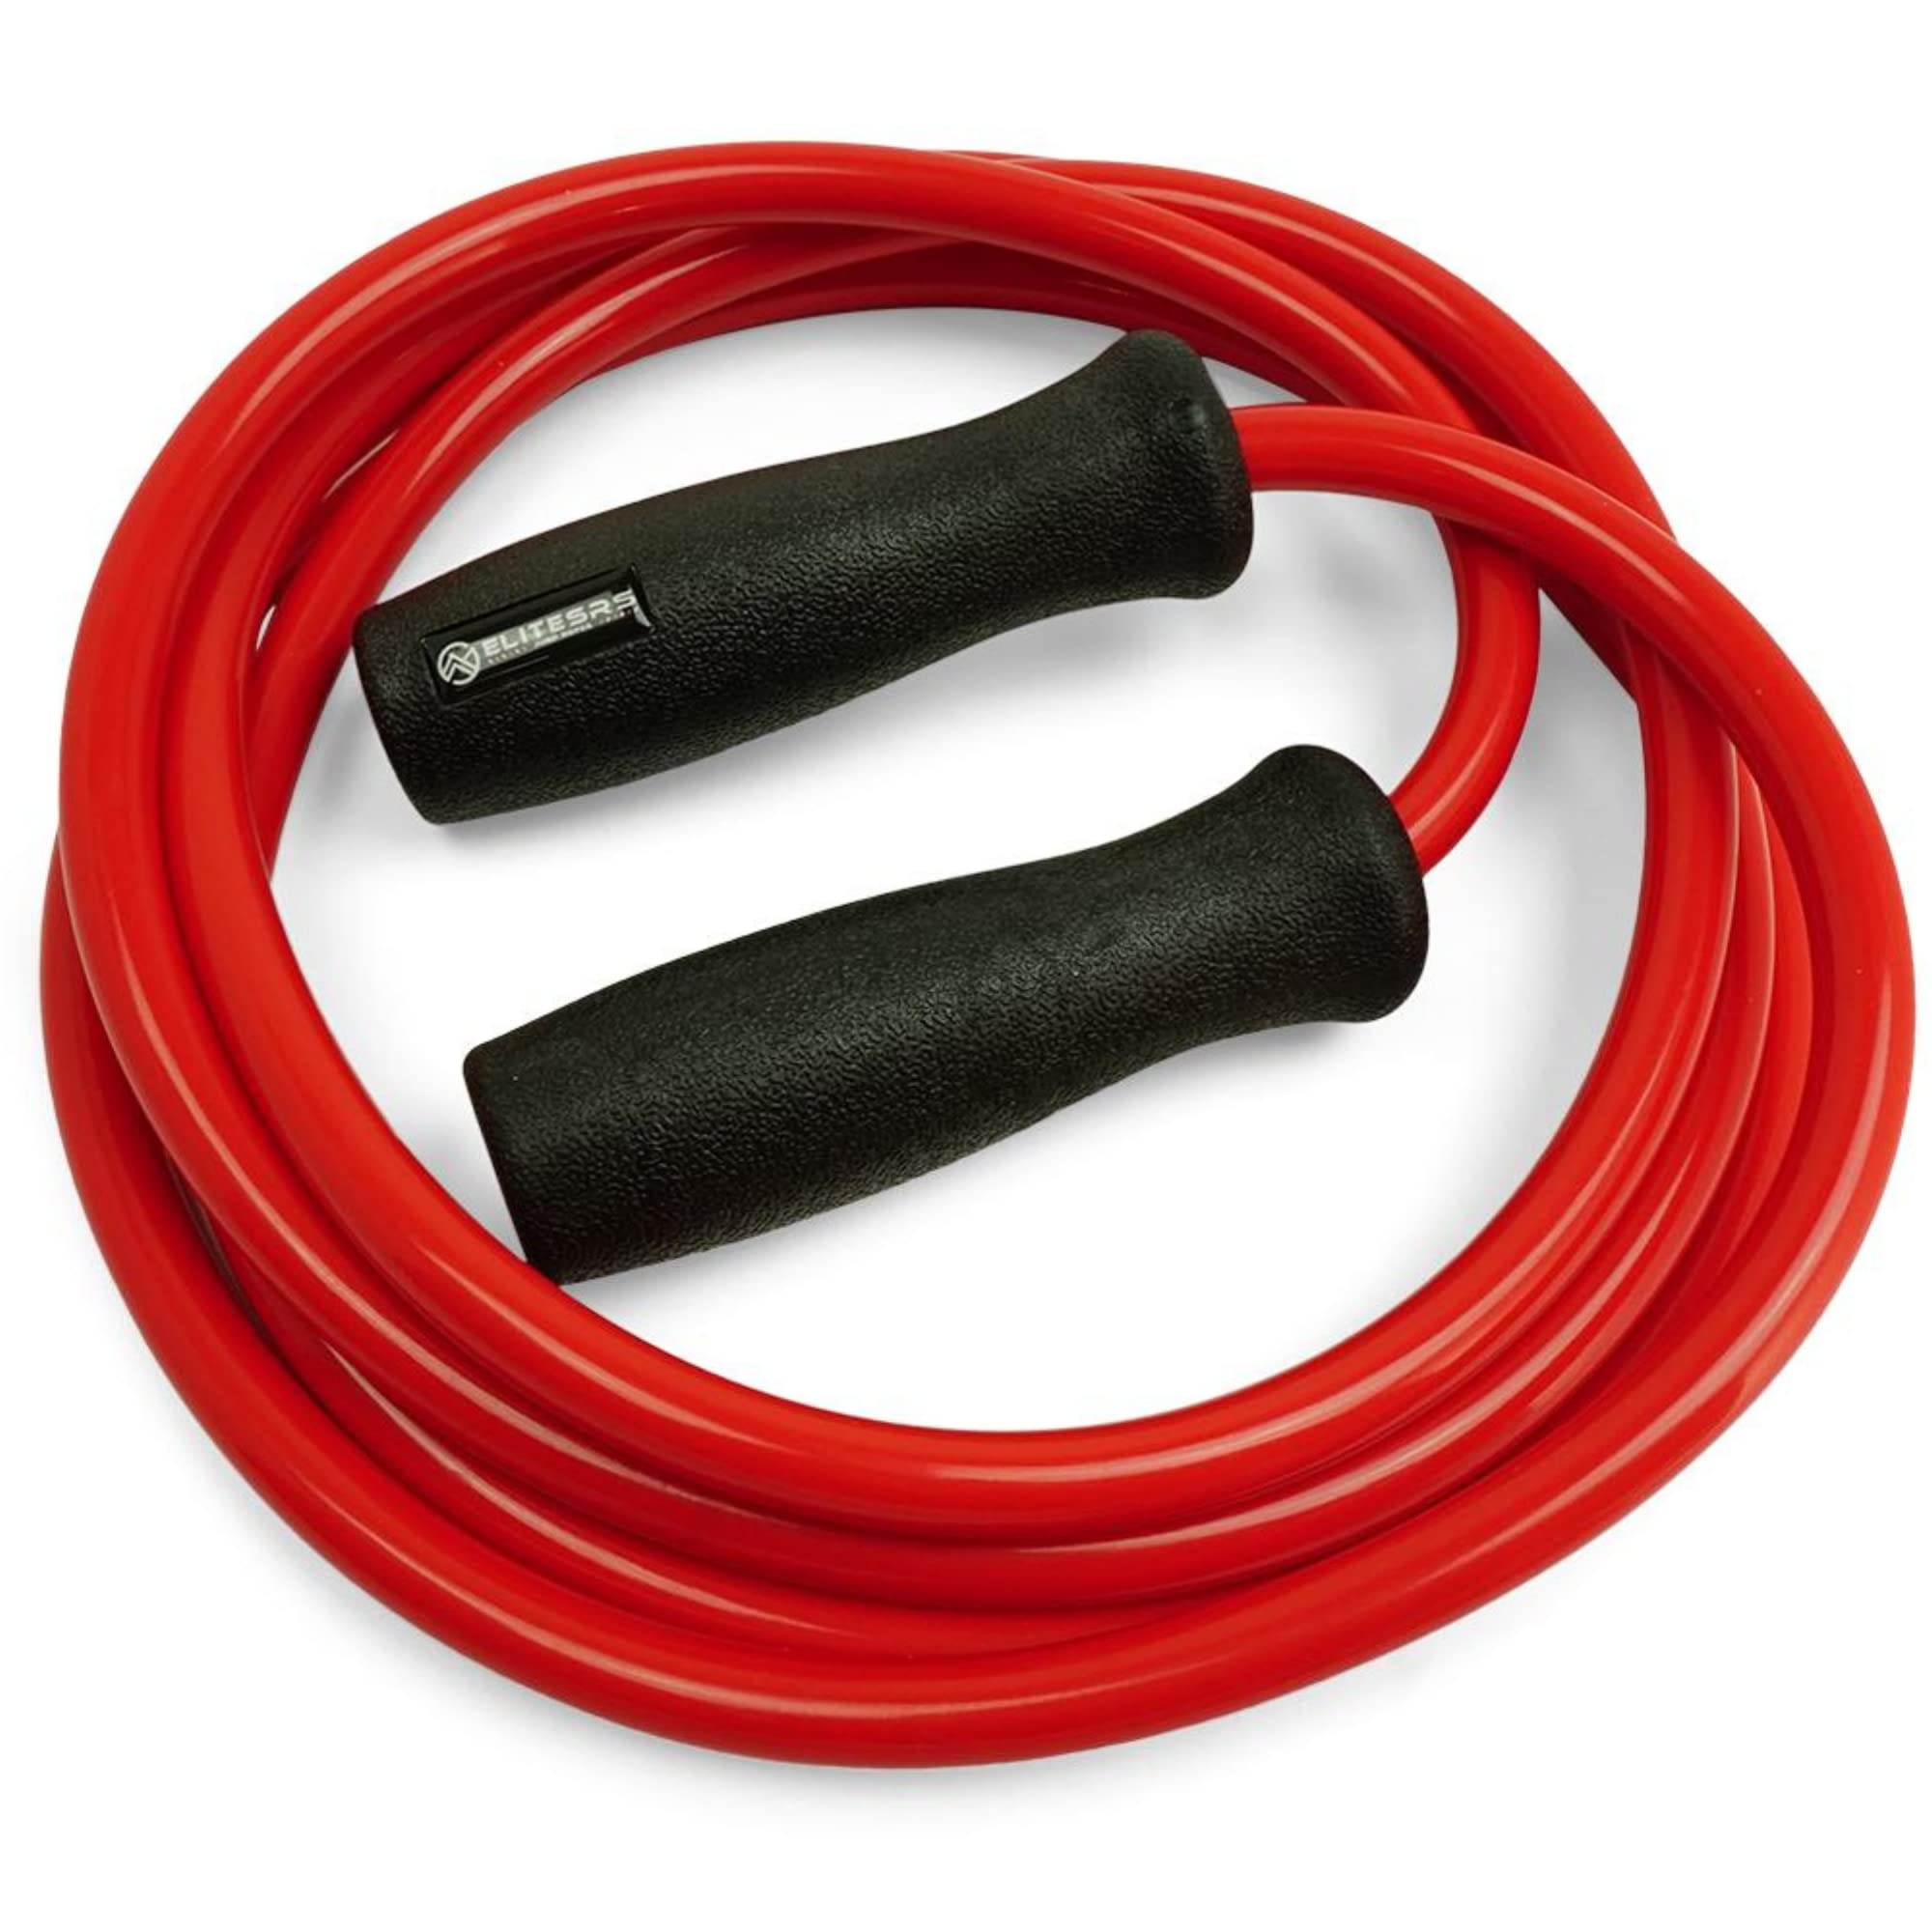 Elite SRS, Muay Thai 2.0 Weighted Jump Rope - Designed for High-Intensity  Training, CrossFit, Muay Thai, & MMA Workouts - Heavy 1.5lb PVC Jump Ropes  for Fitness Crimson Red - 9FT